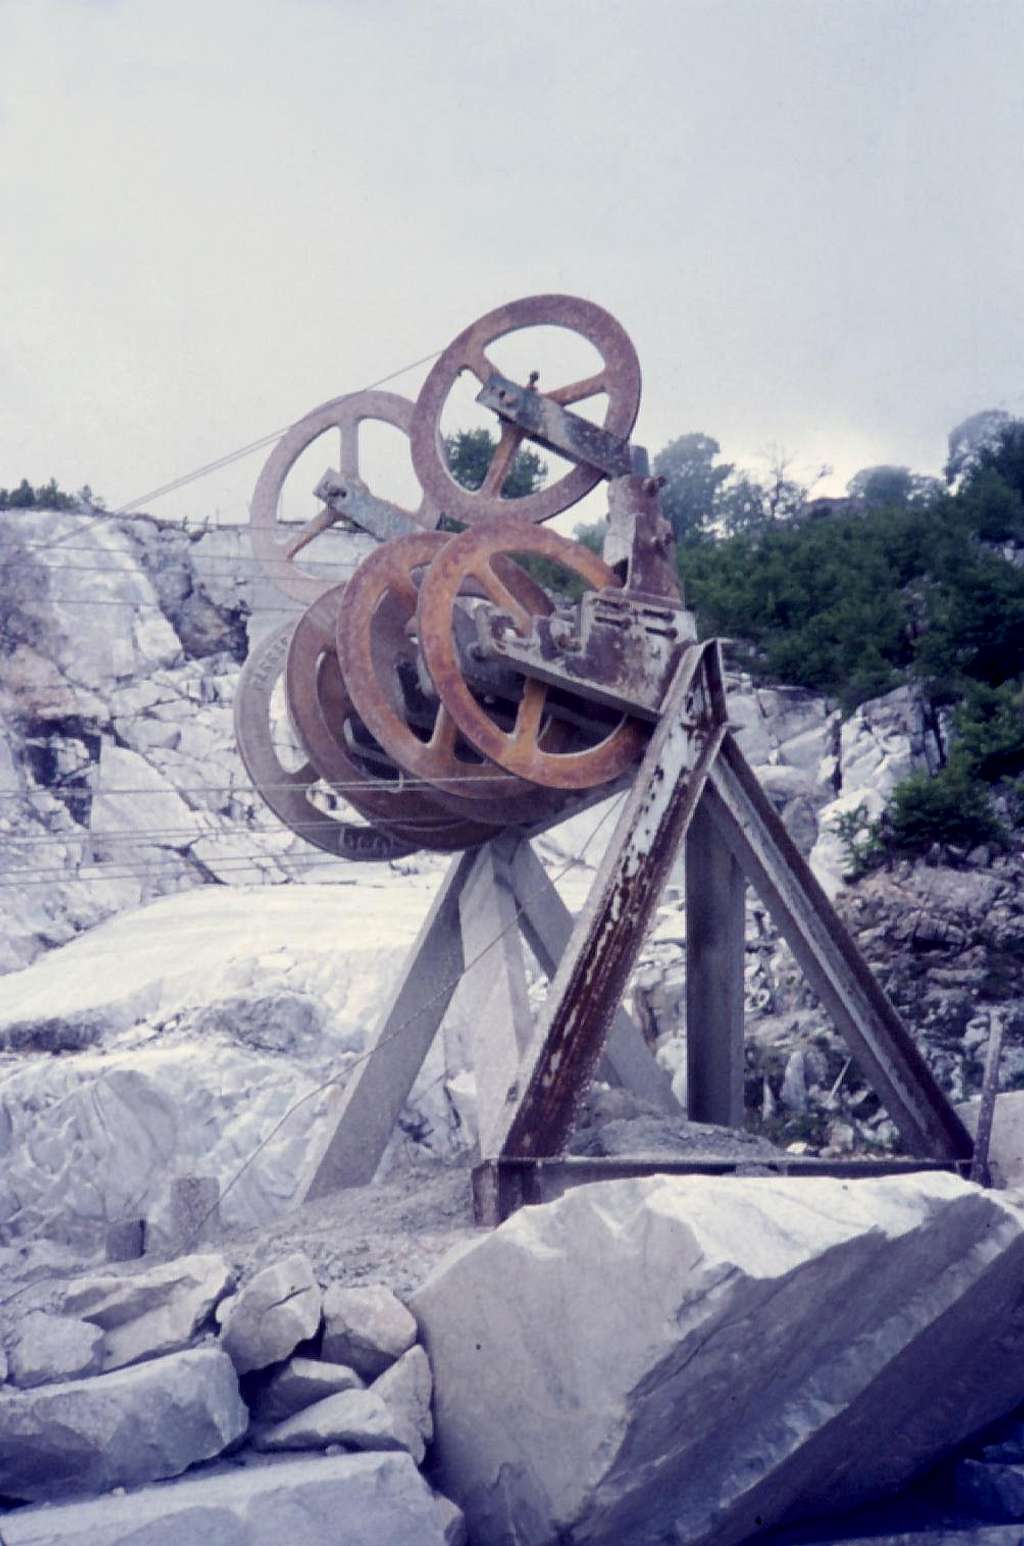 Apuanian Alps' white marble processing